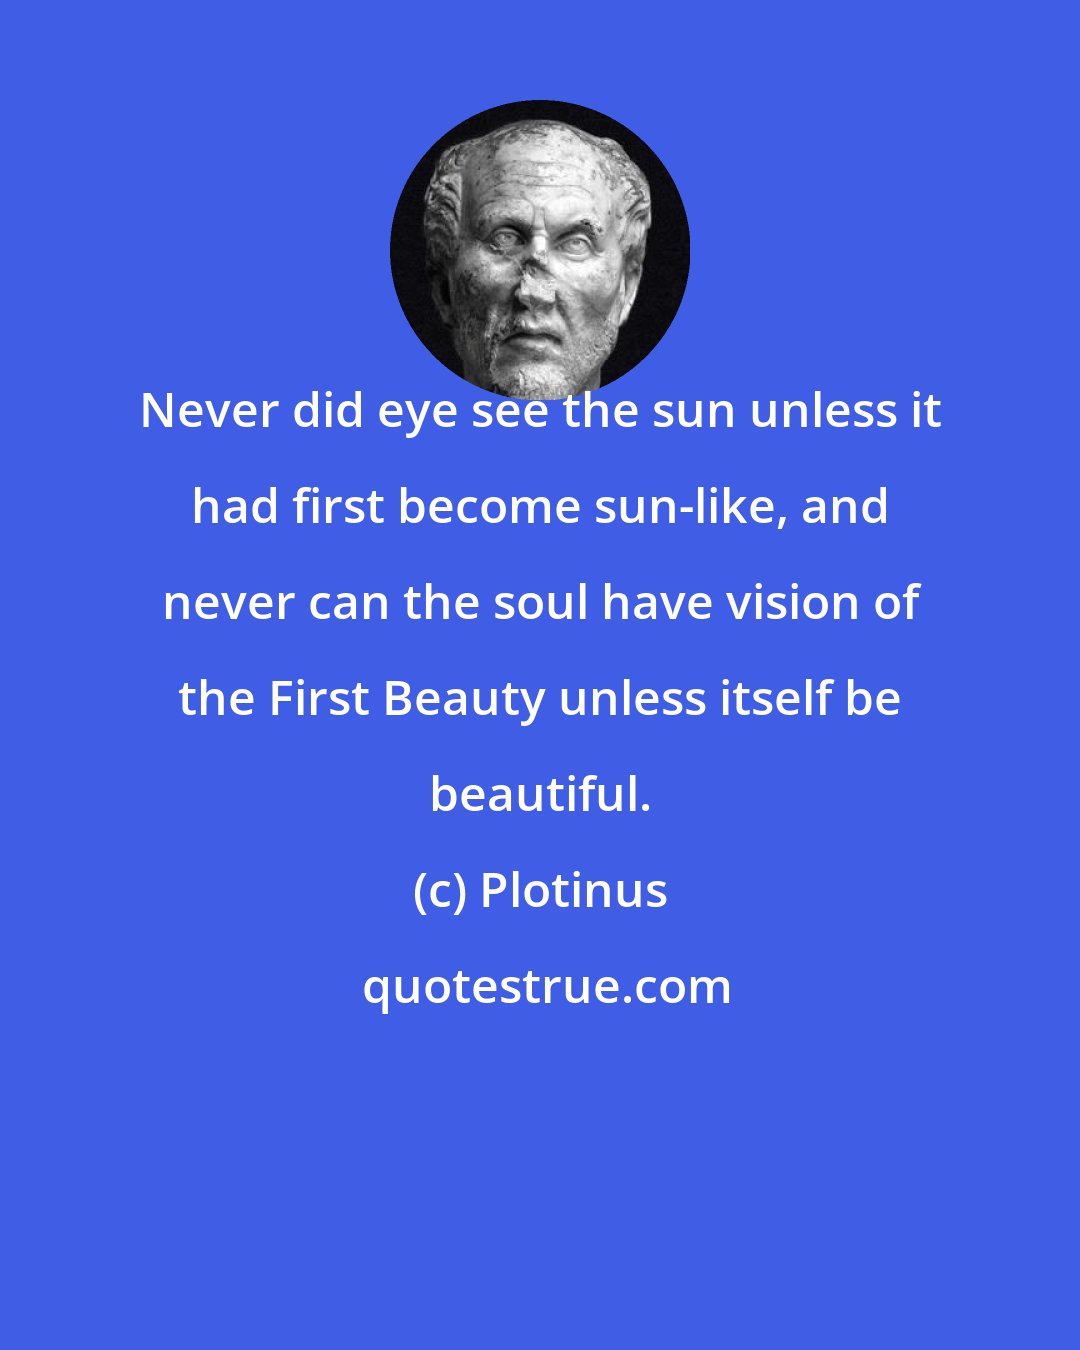 Plotinus: Never did eye see the sun unless it had first become sun-like, and never can the soul have vision of the First Beauty unless itself be beautiful.